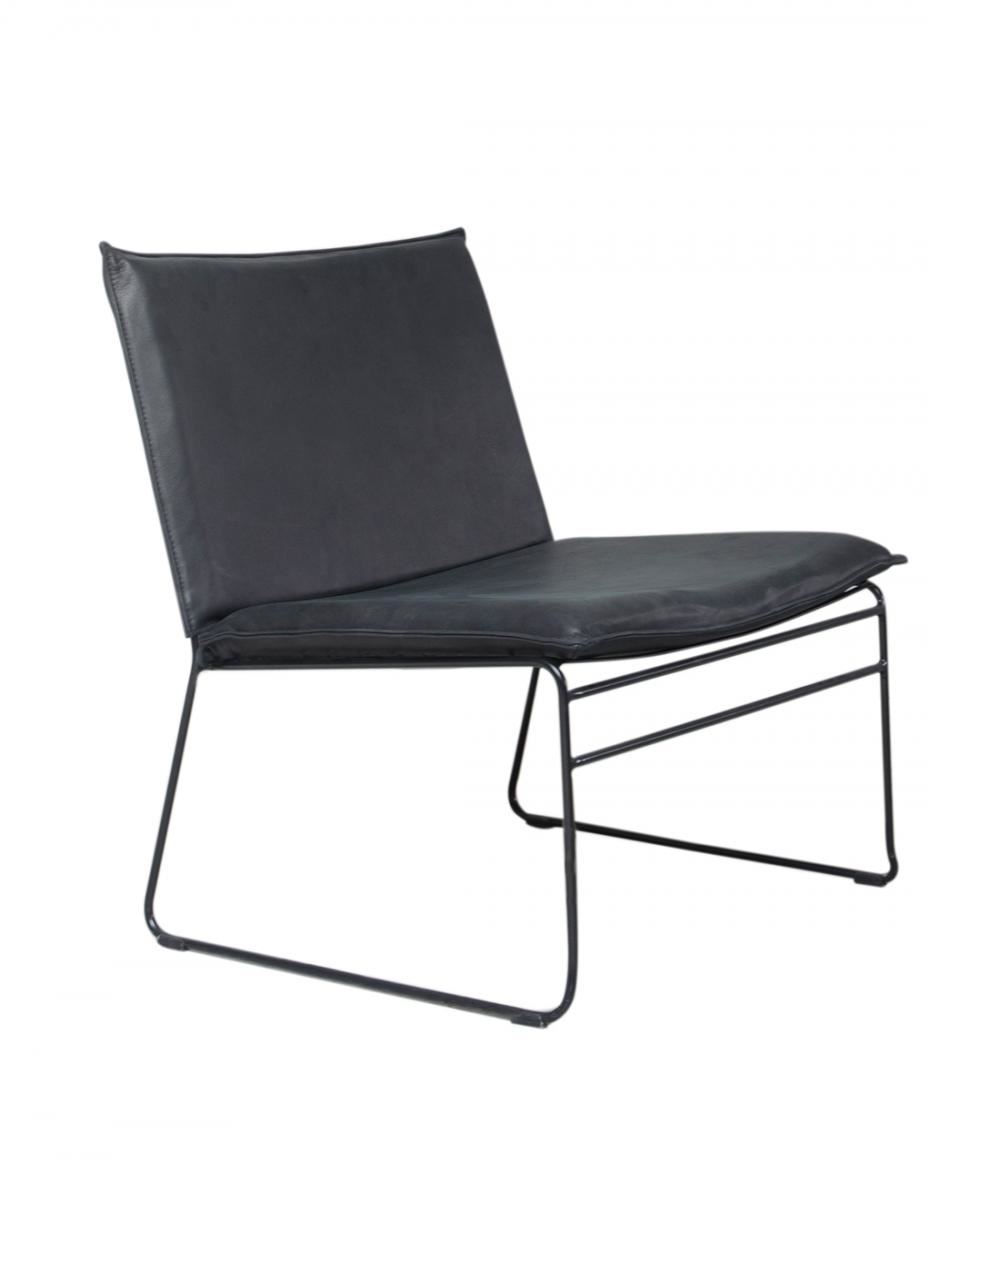 Kyst Lounge Chair Outdoor Lounge Chair With Dark Grey Cushion None